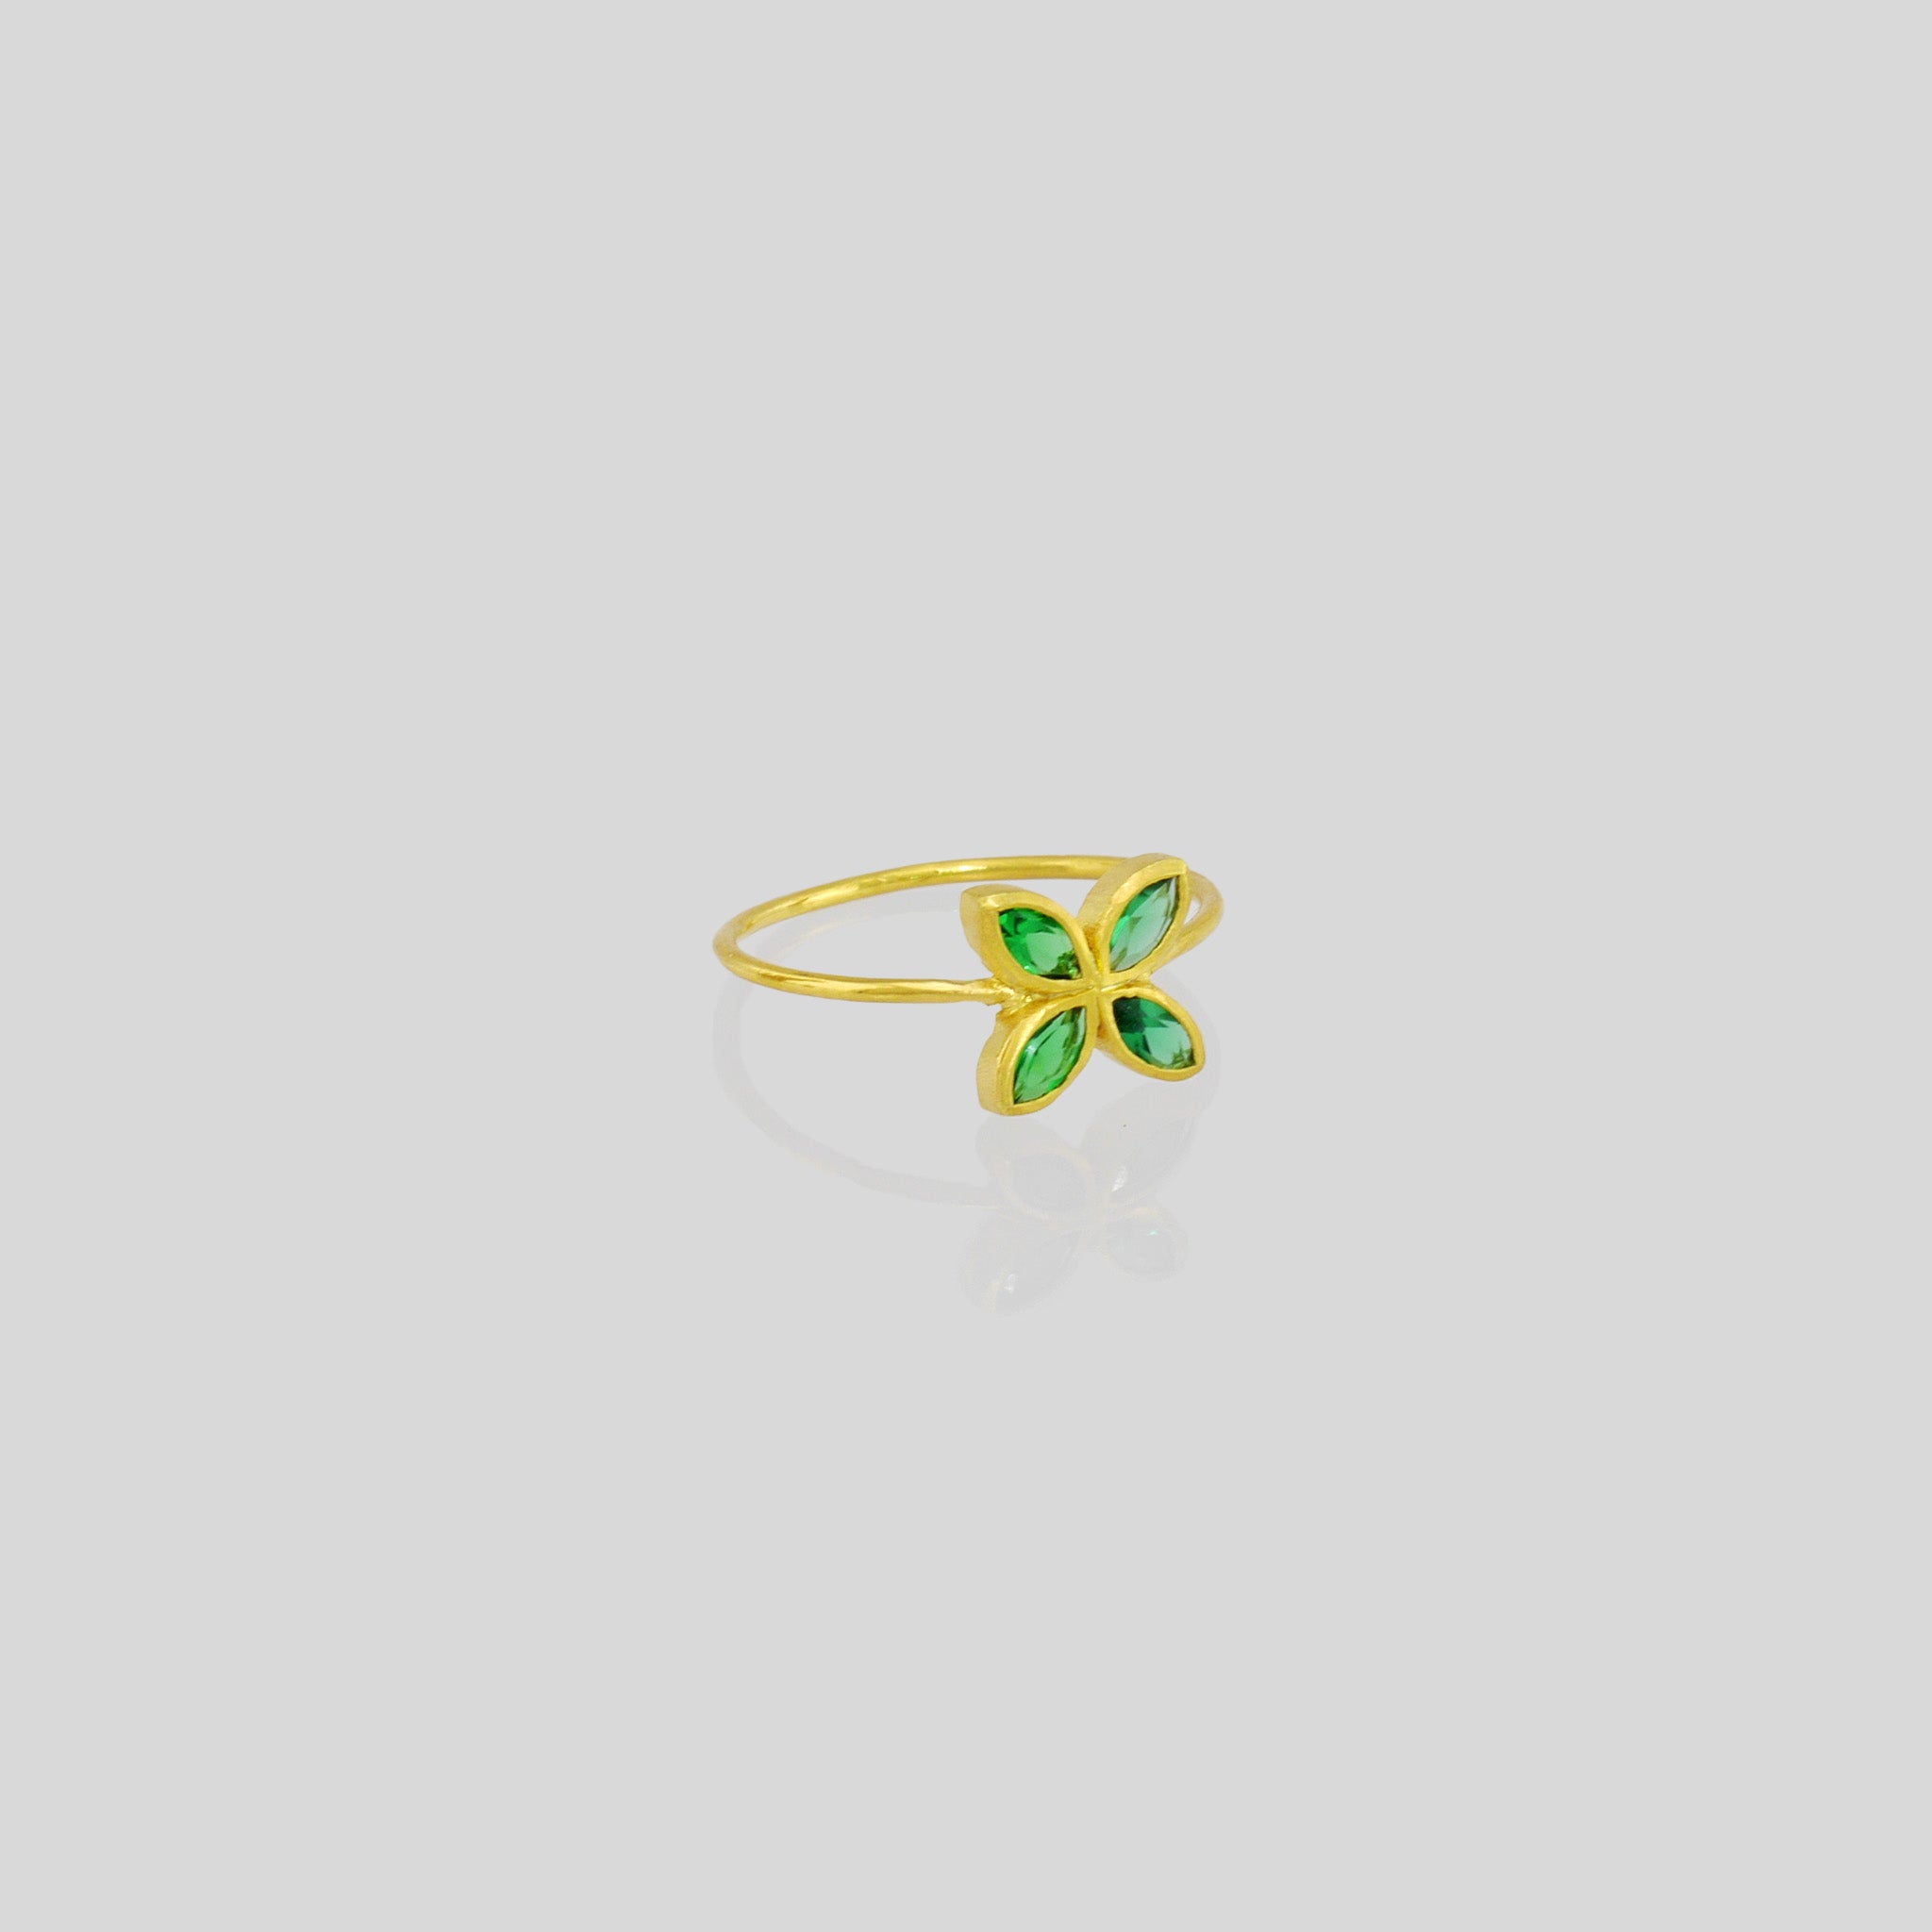 Delicate Gold ring with Emerald marquise in a flower-shaped design. Radiant and cheerful addition to any collection.